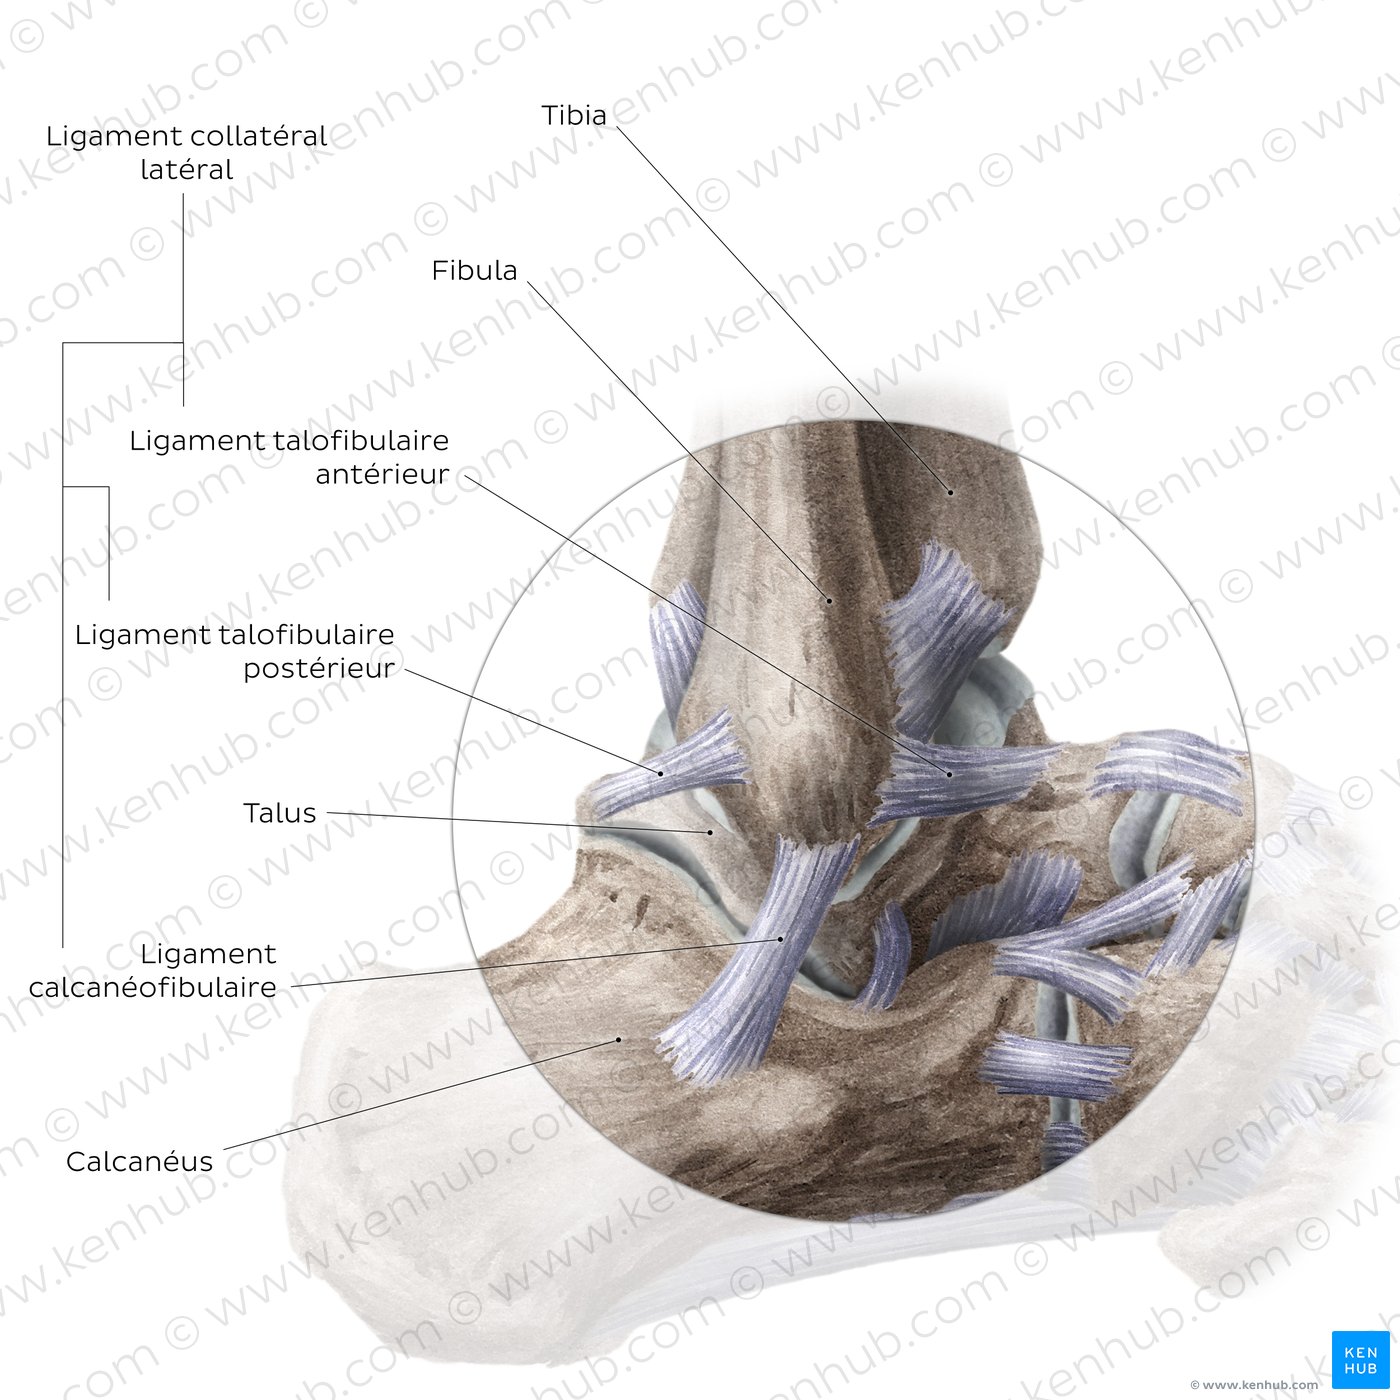 Ankle joint: Lateral view